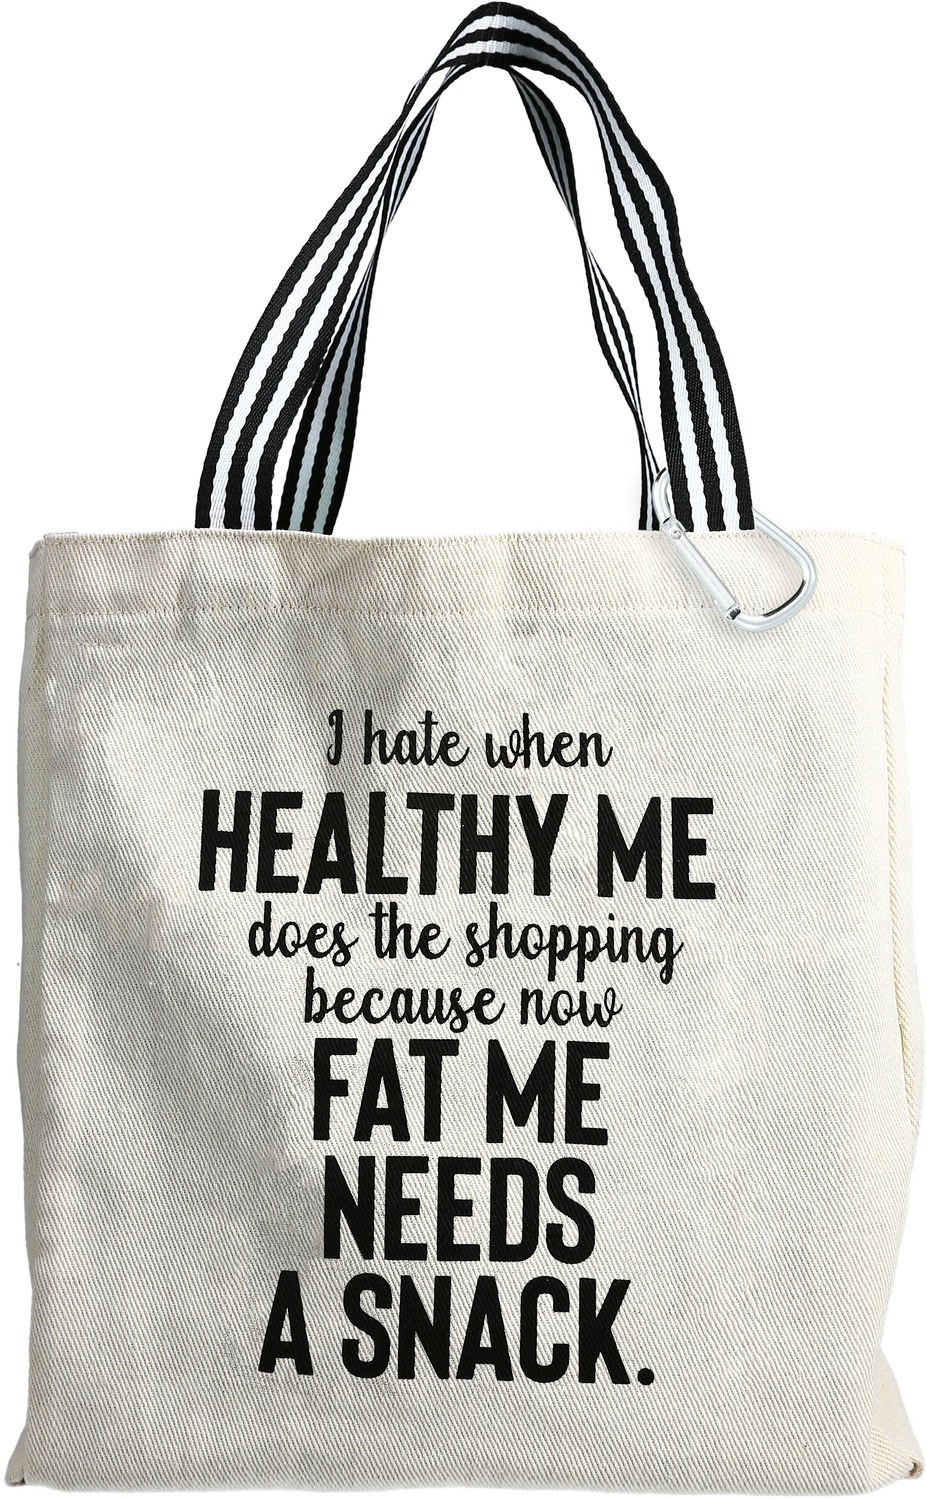 Healthy Me by Check Me Out - Healthy Me - 100% Cotton Twill Gift Bag